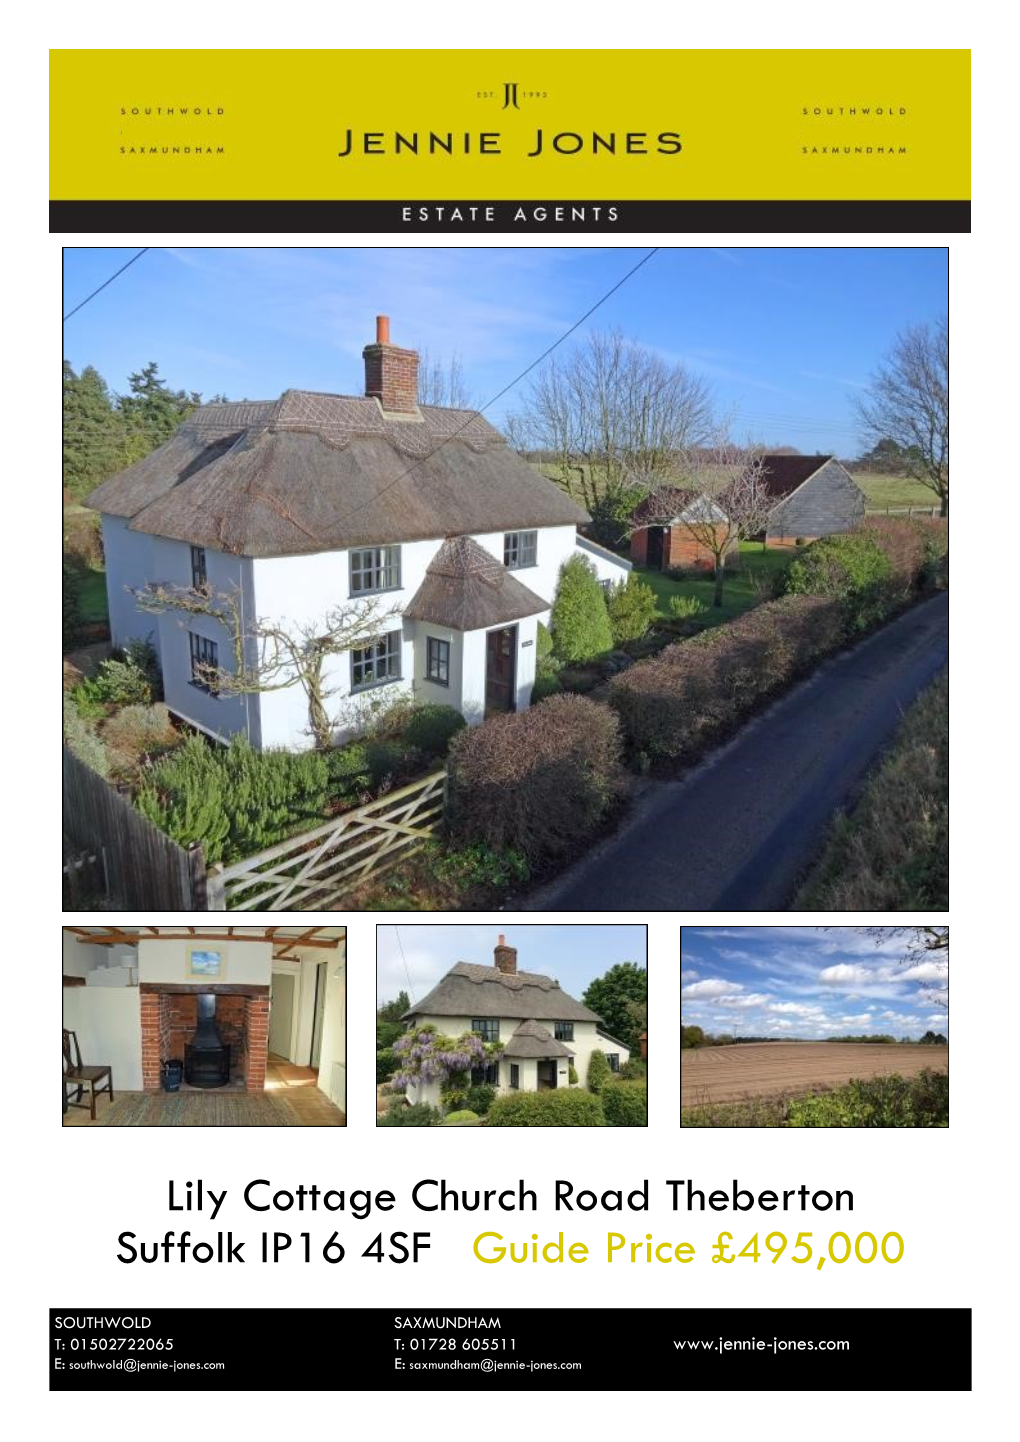 Lily Cottage Church Road Theberton Suffolk IP16 4SF Guide Price £495,000